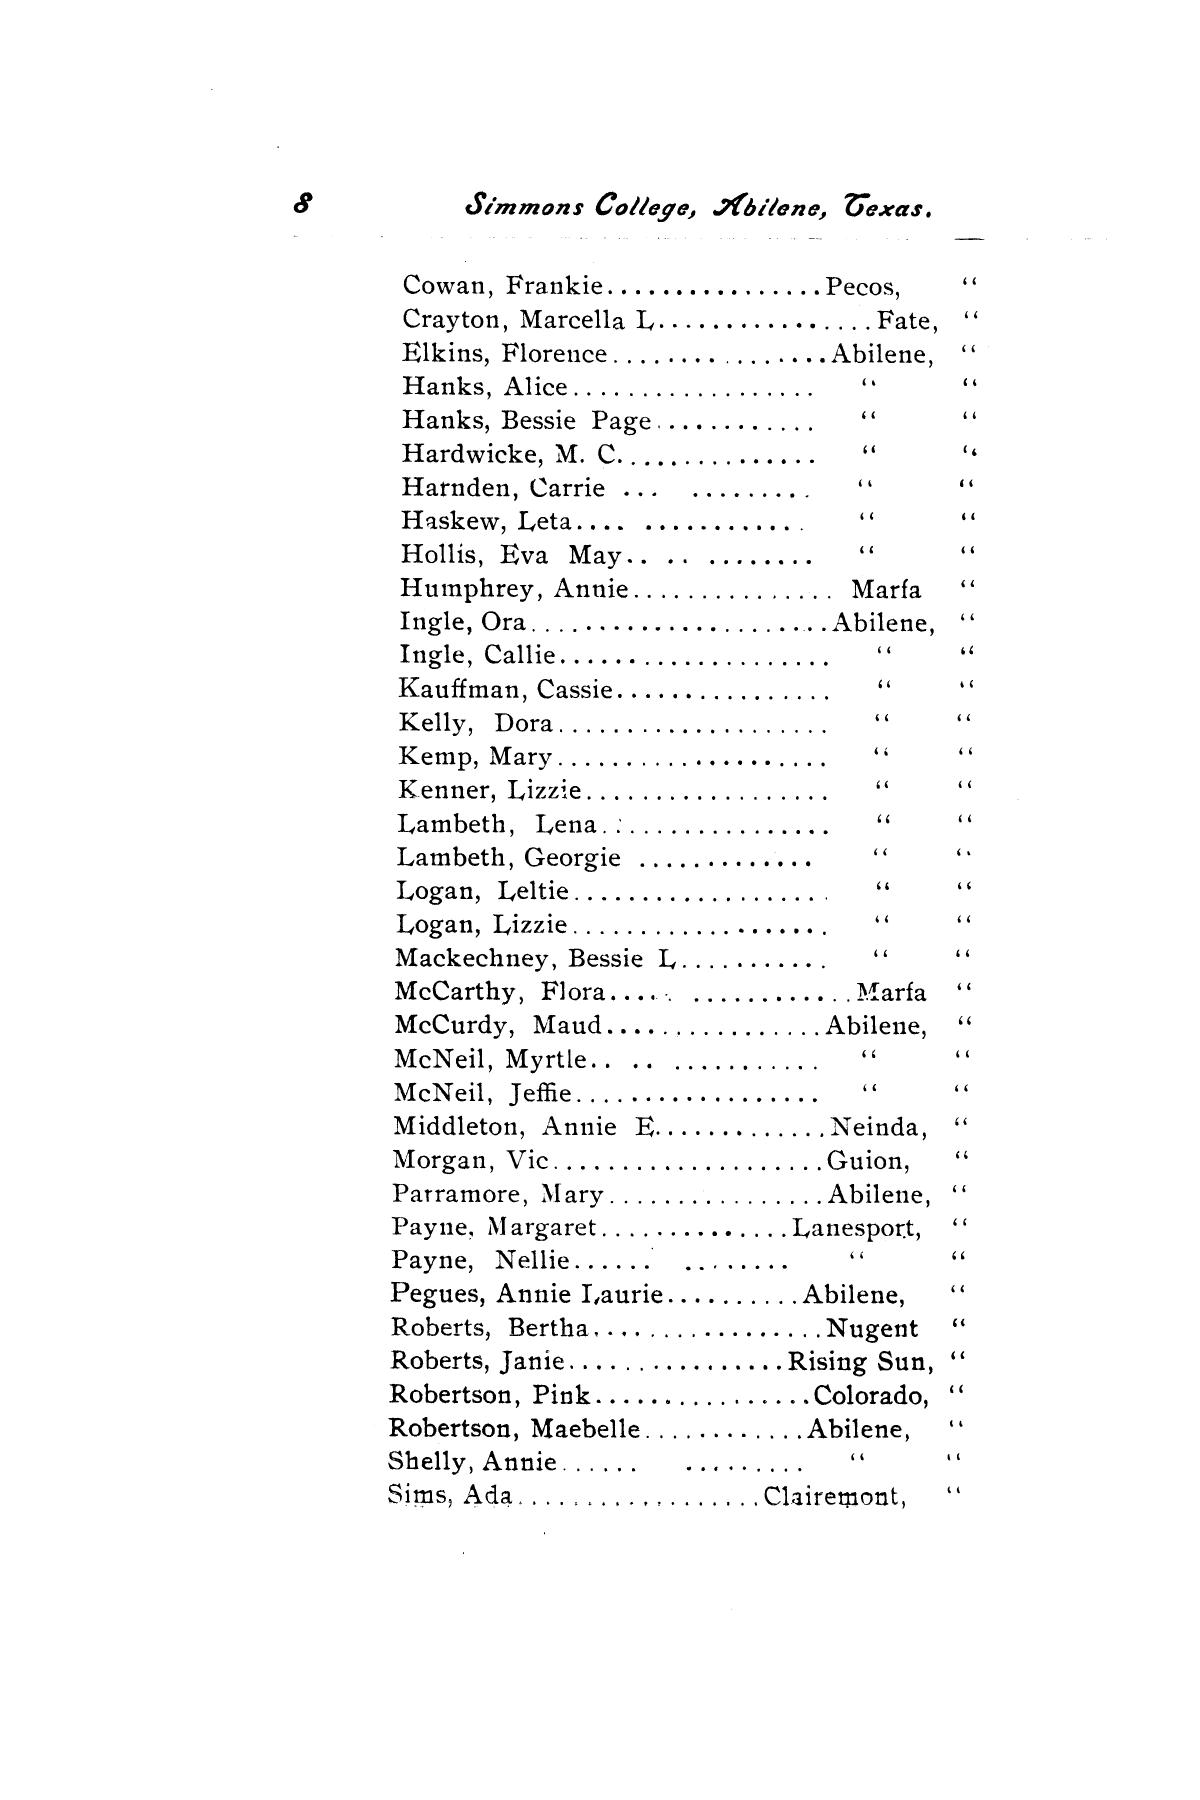 Catalogue of Simmons College, 1897-1898
                                                
                                                    8
                                                